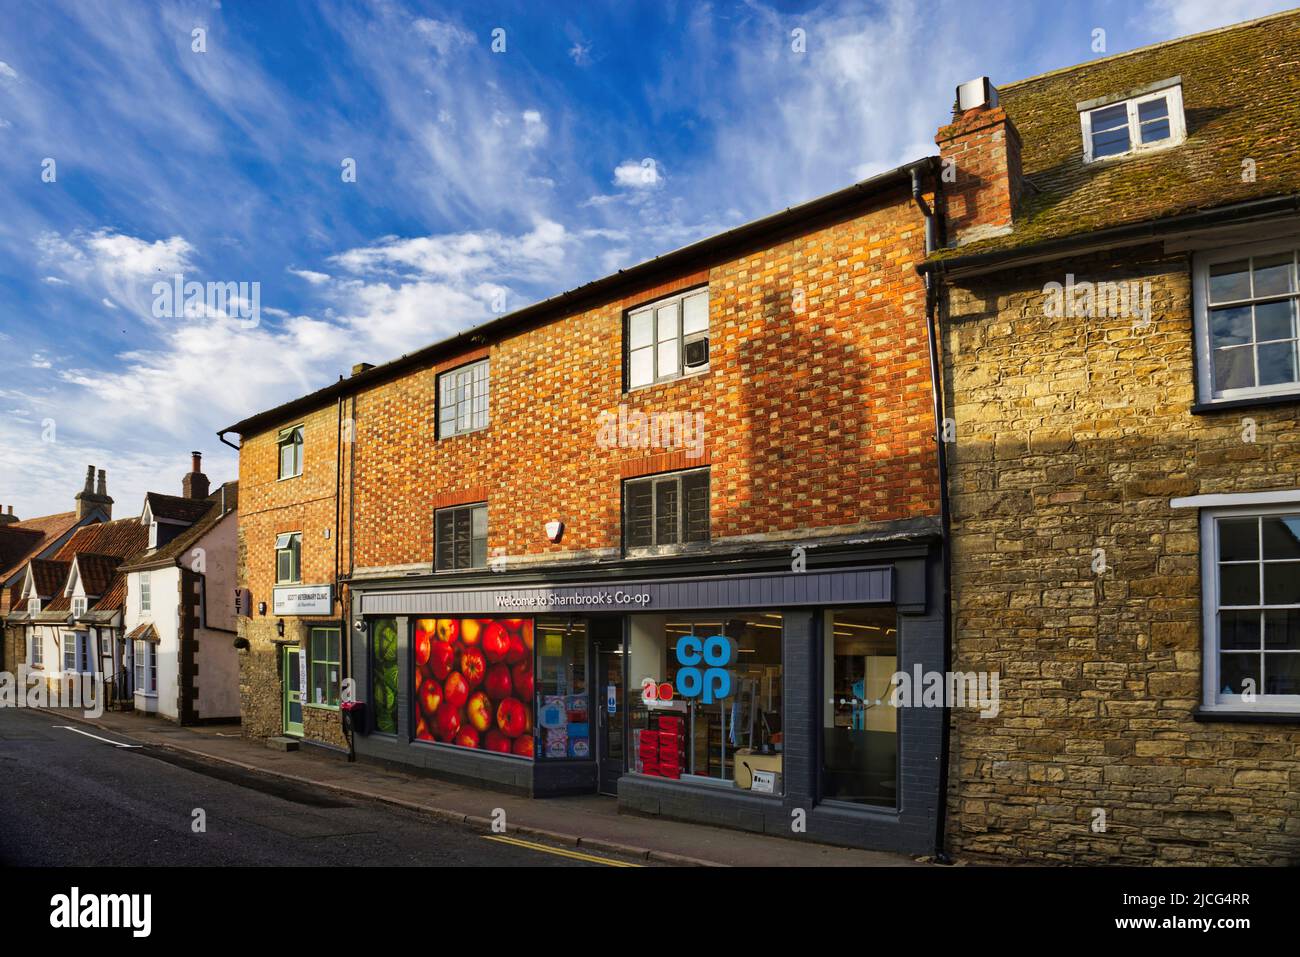 Sharnbrook, Bedfordshire, England, UK - Co-op shop, veterinary clinic and cottages in the village high street on a sunny morning Stock Photo